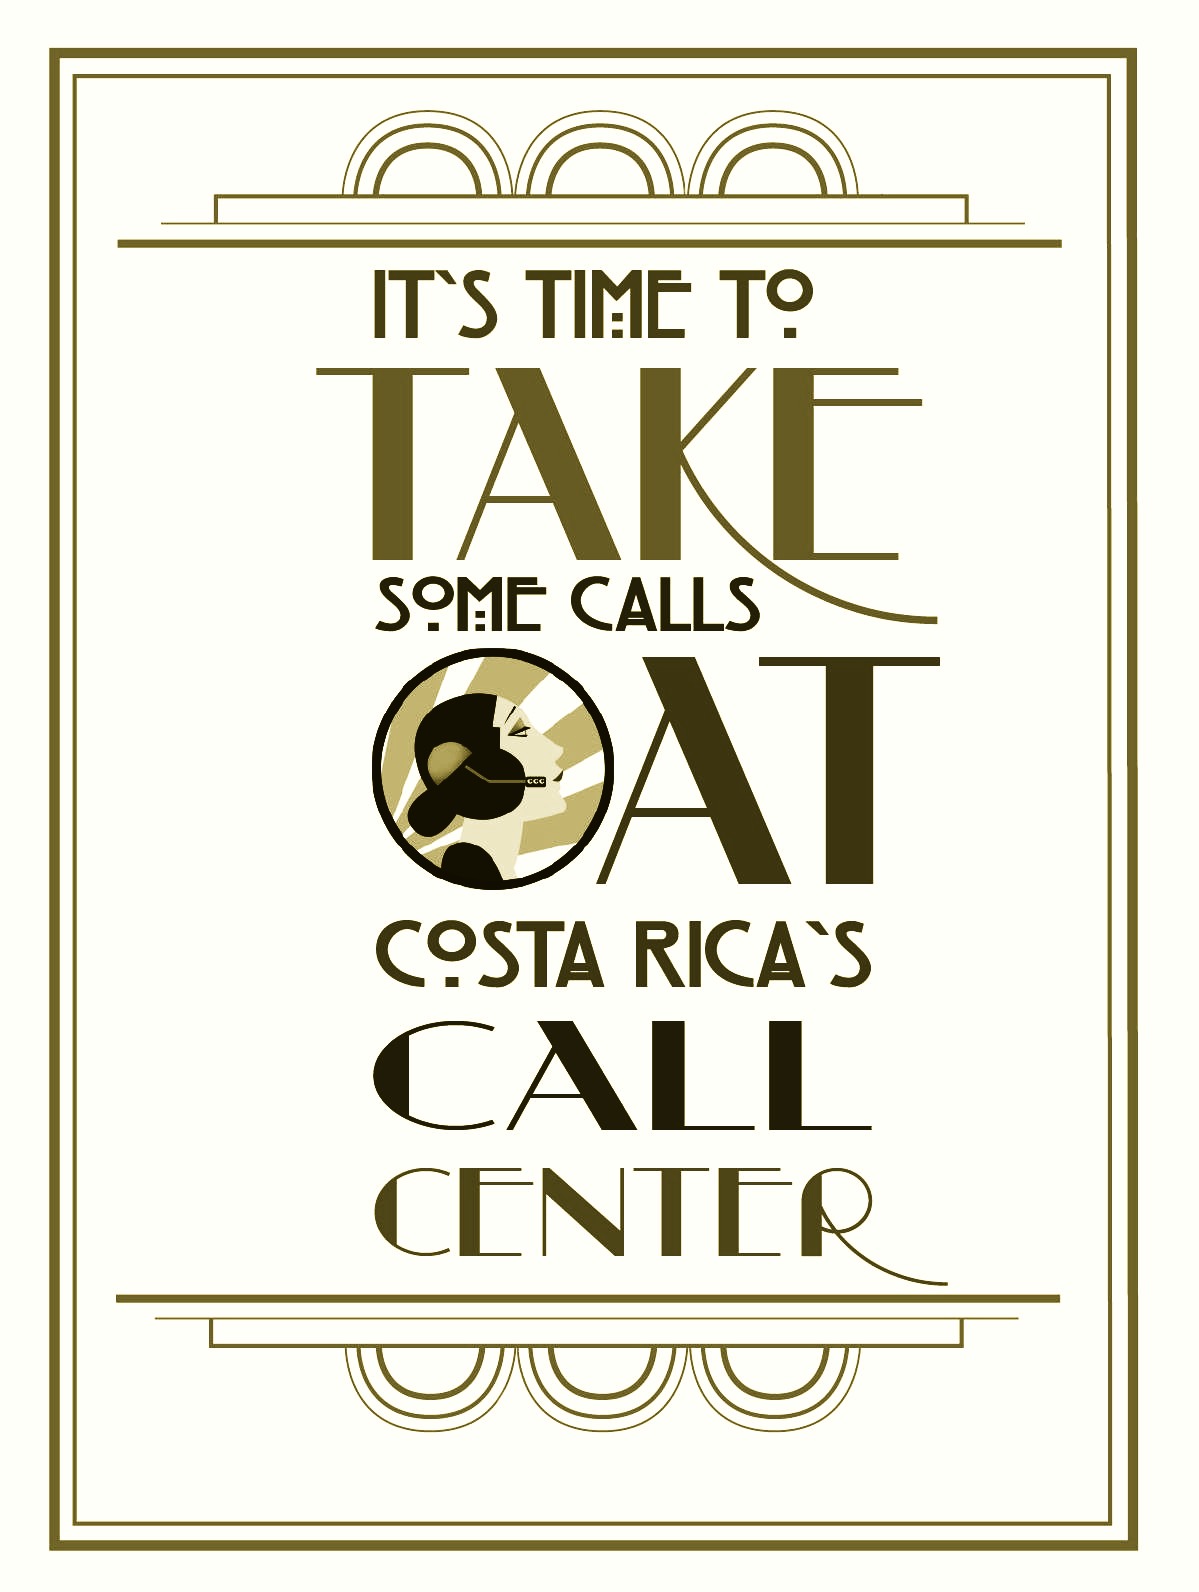 COLD CALL AND OFFSHORING COSTA RICA.jpg  by richardblank